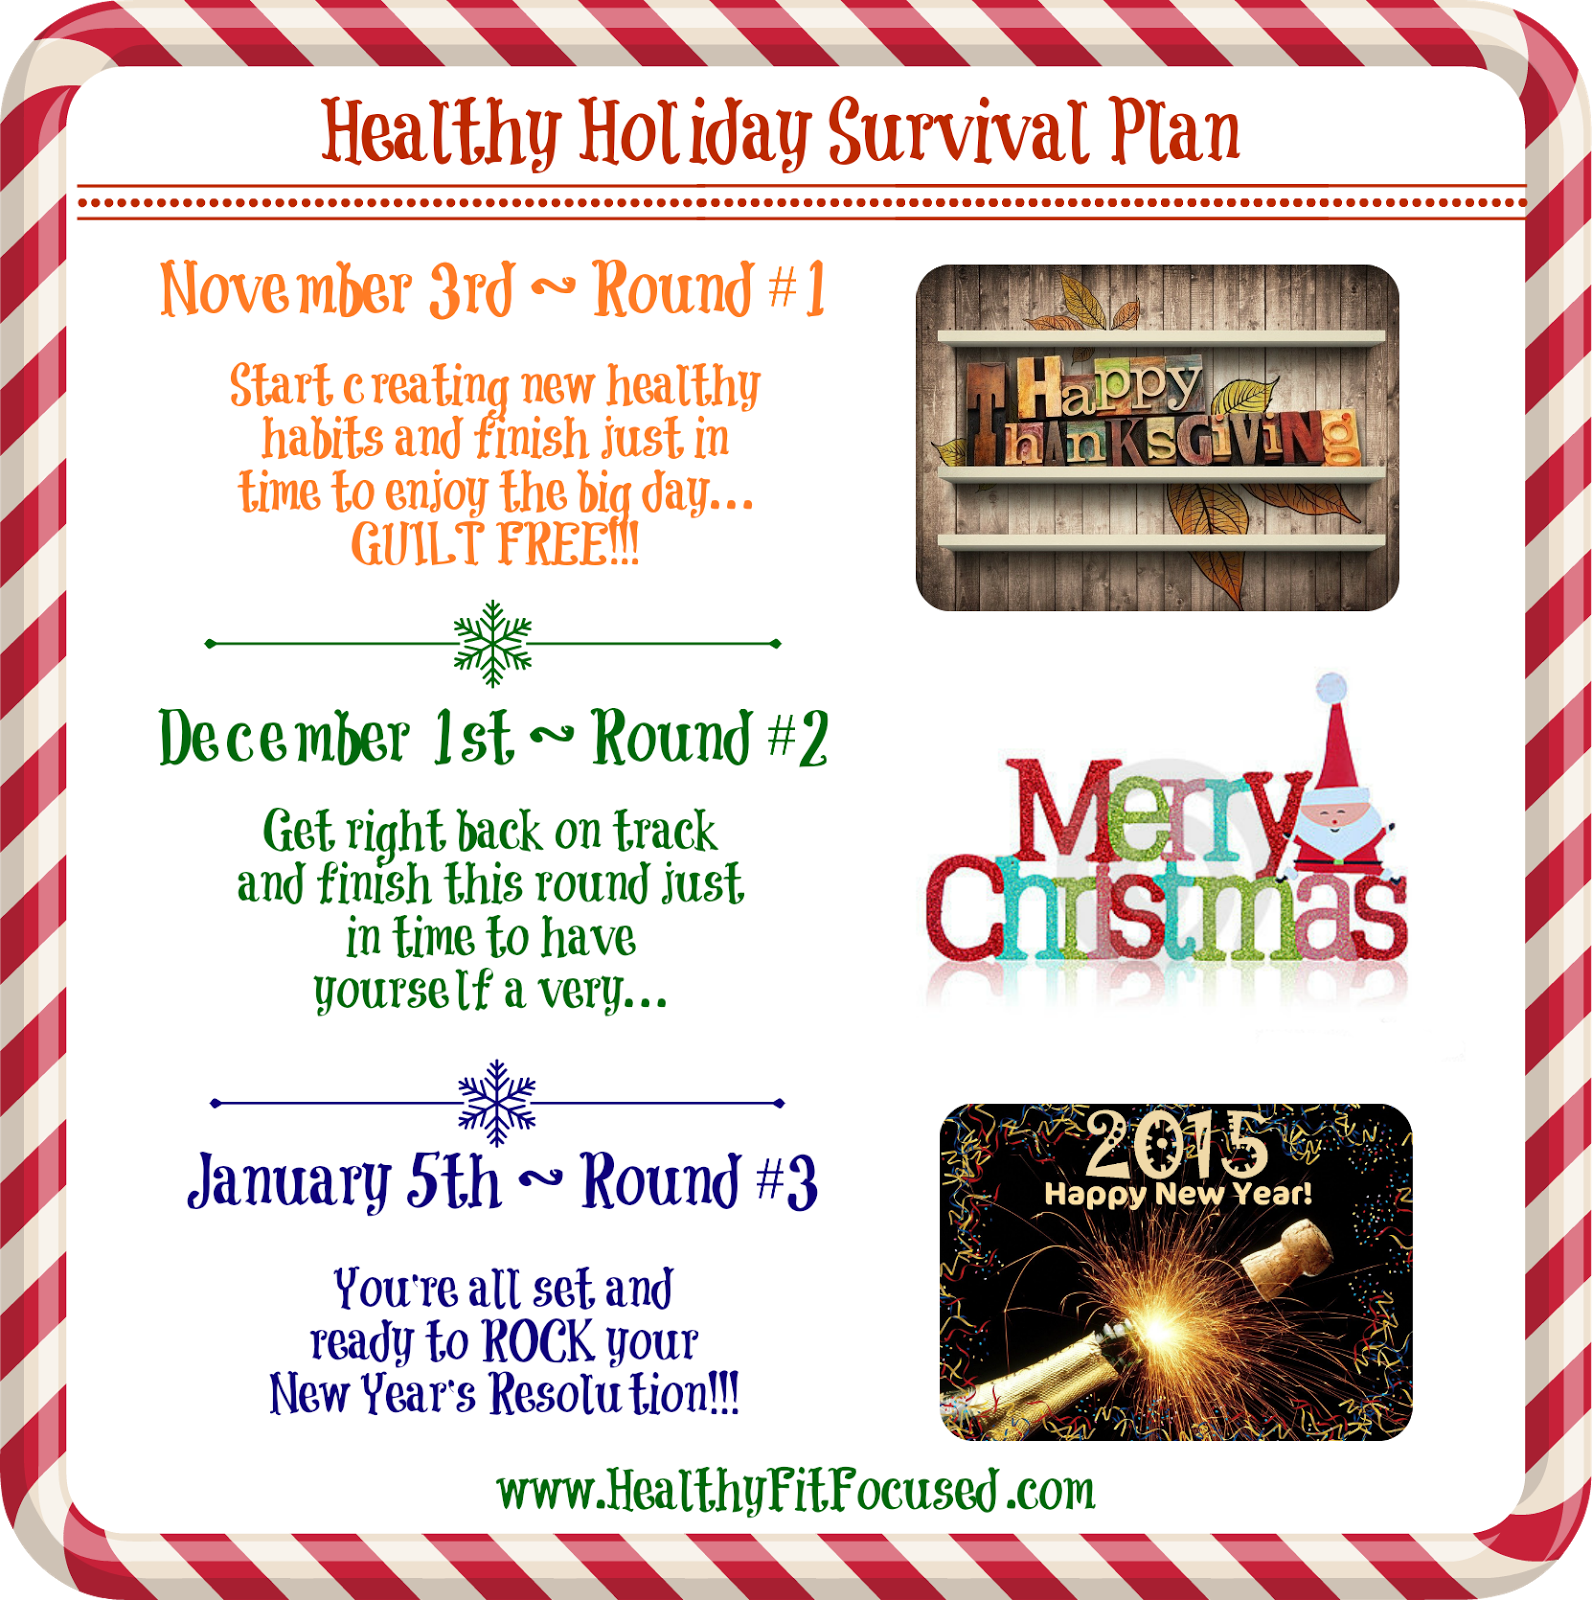 Healthy Holiday Survival Plan, stay fit during the holidays, www.HealthyFitFocused.com 